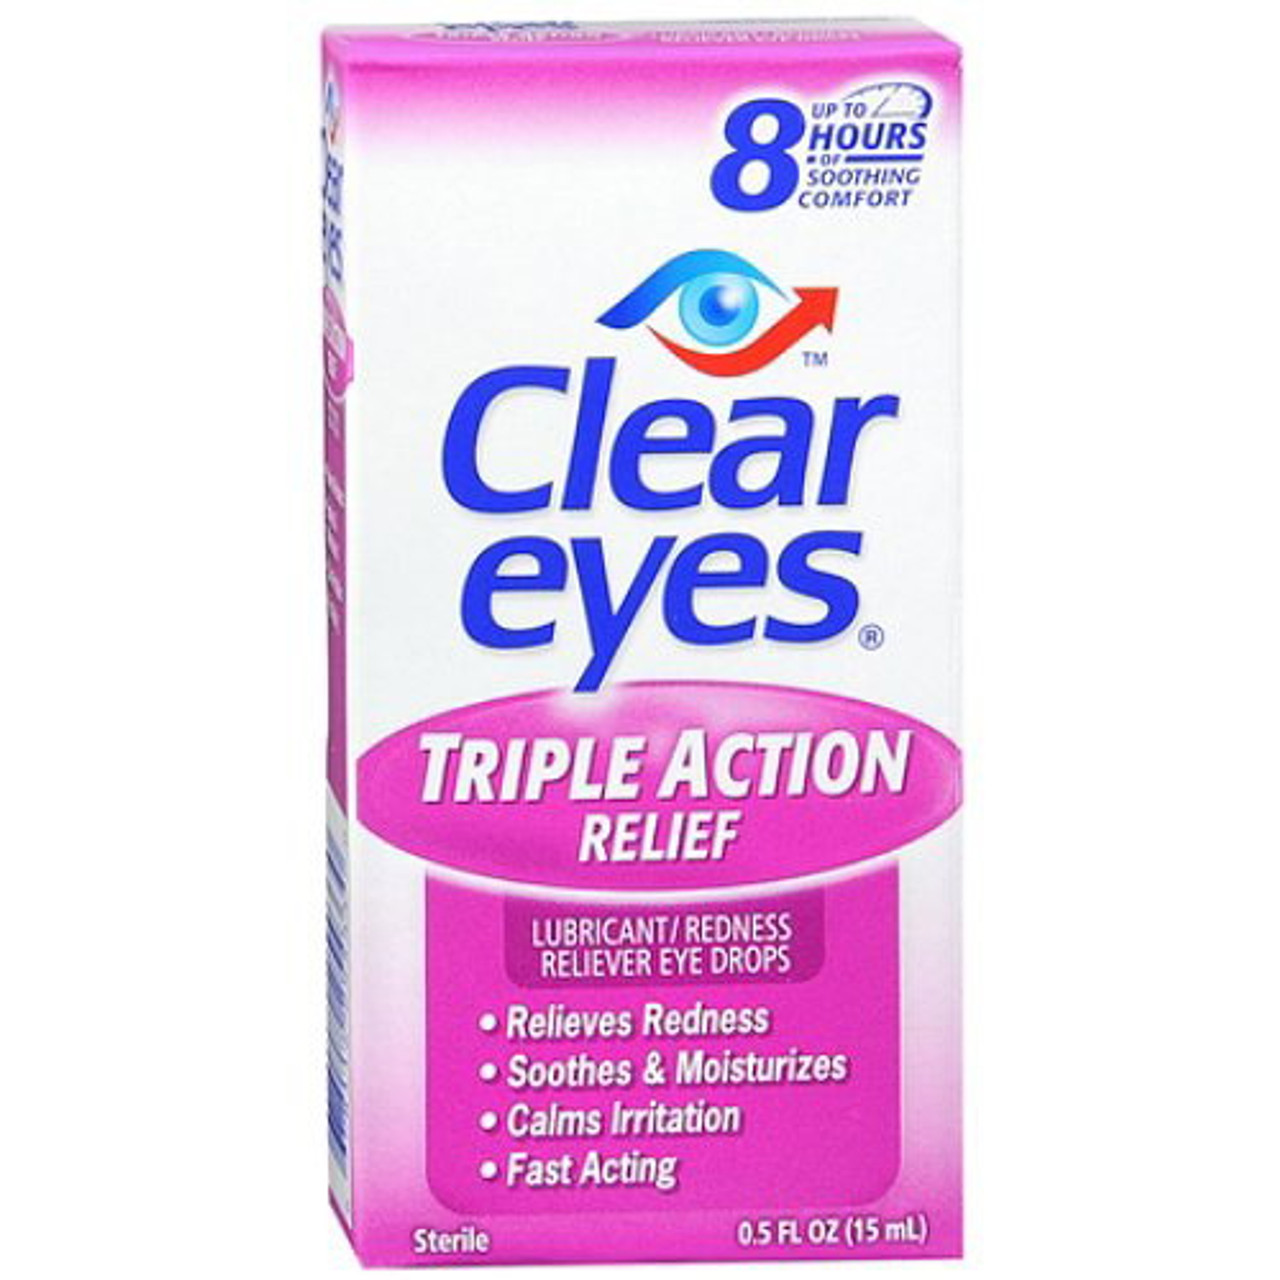 Clear Eyes Triple Action Lubricant Redness Reliever Eye Drops - 0.5 Oz 